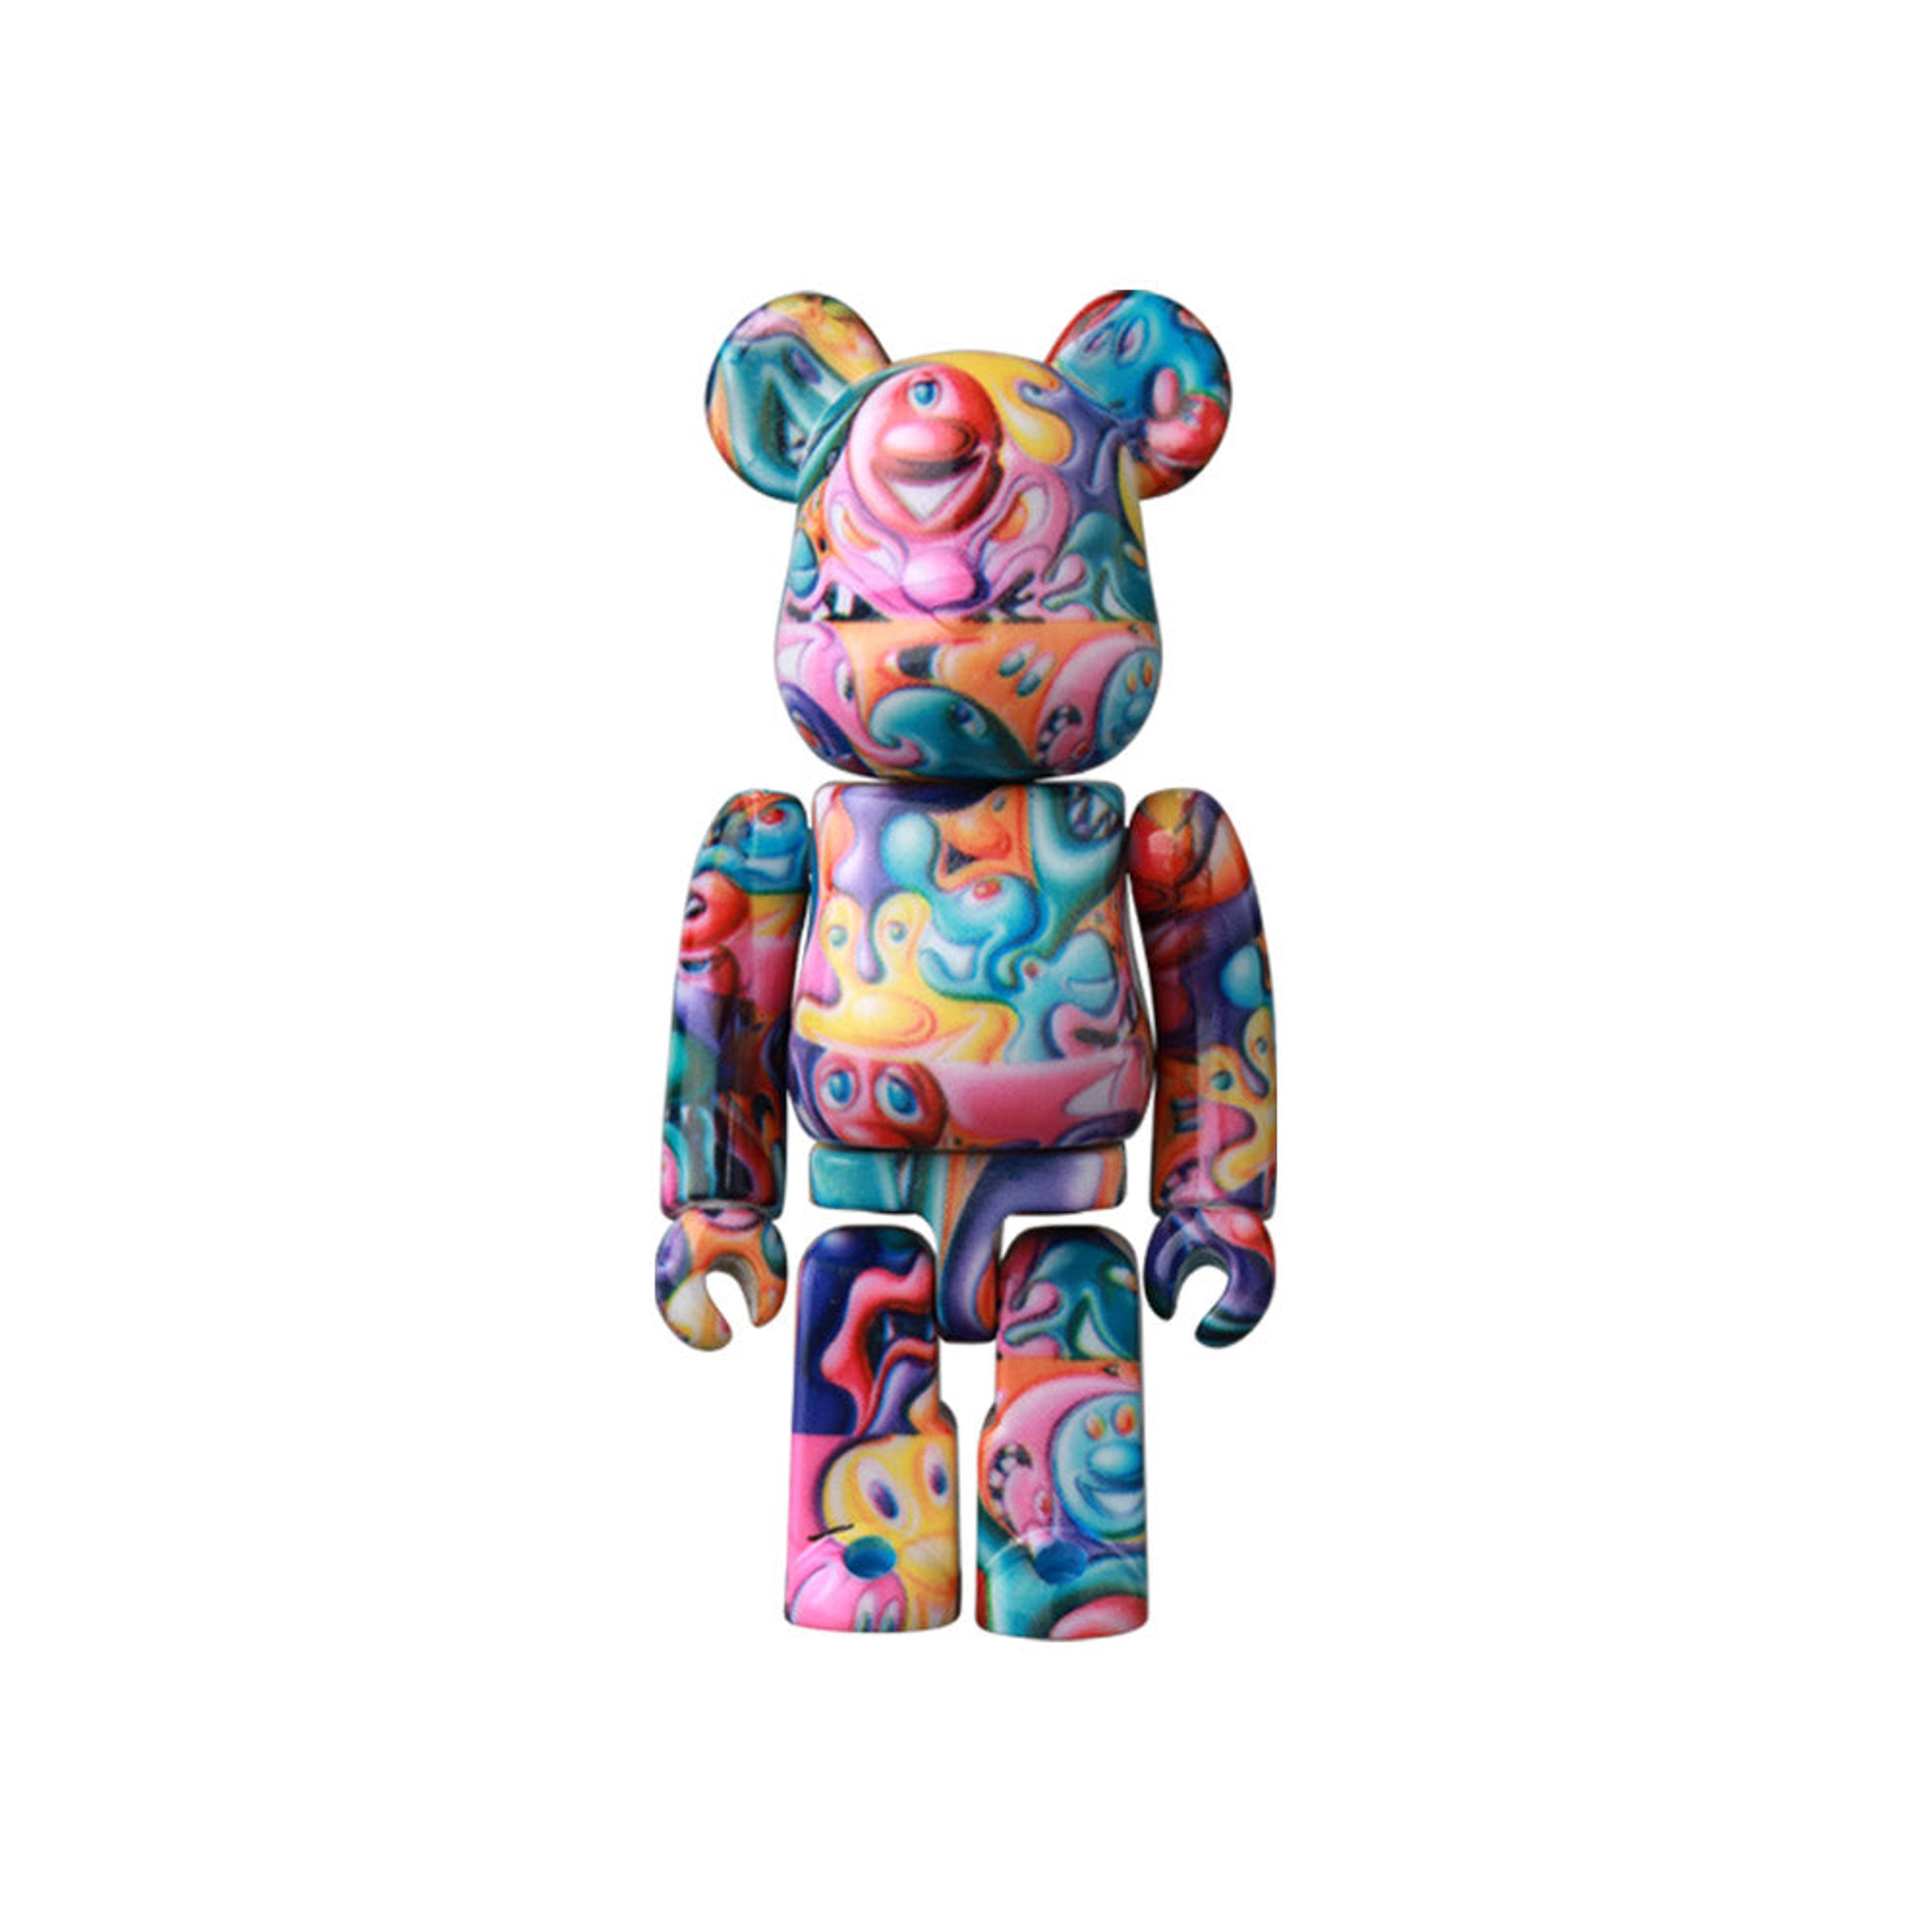 Alternate View 13 of Bearbrick Series 44 Display Case (24 Blind Boxes) by Medicom Toy